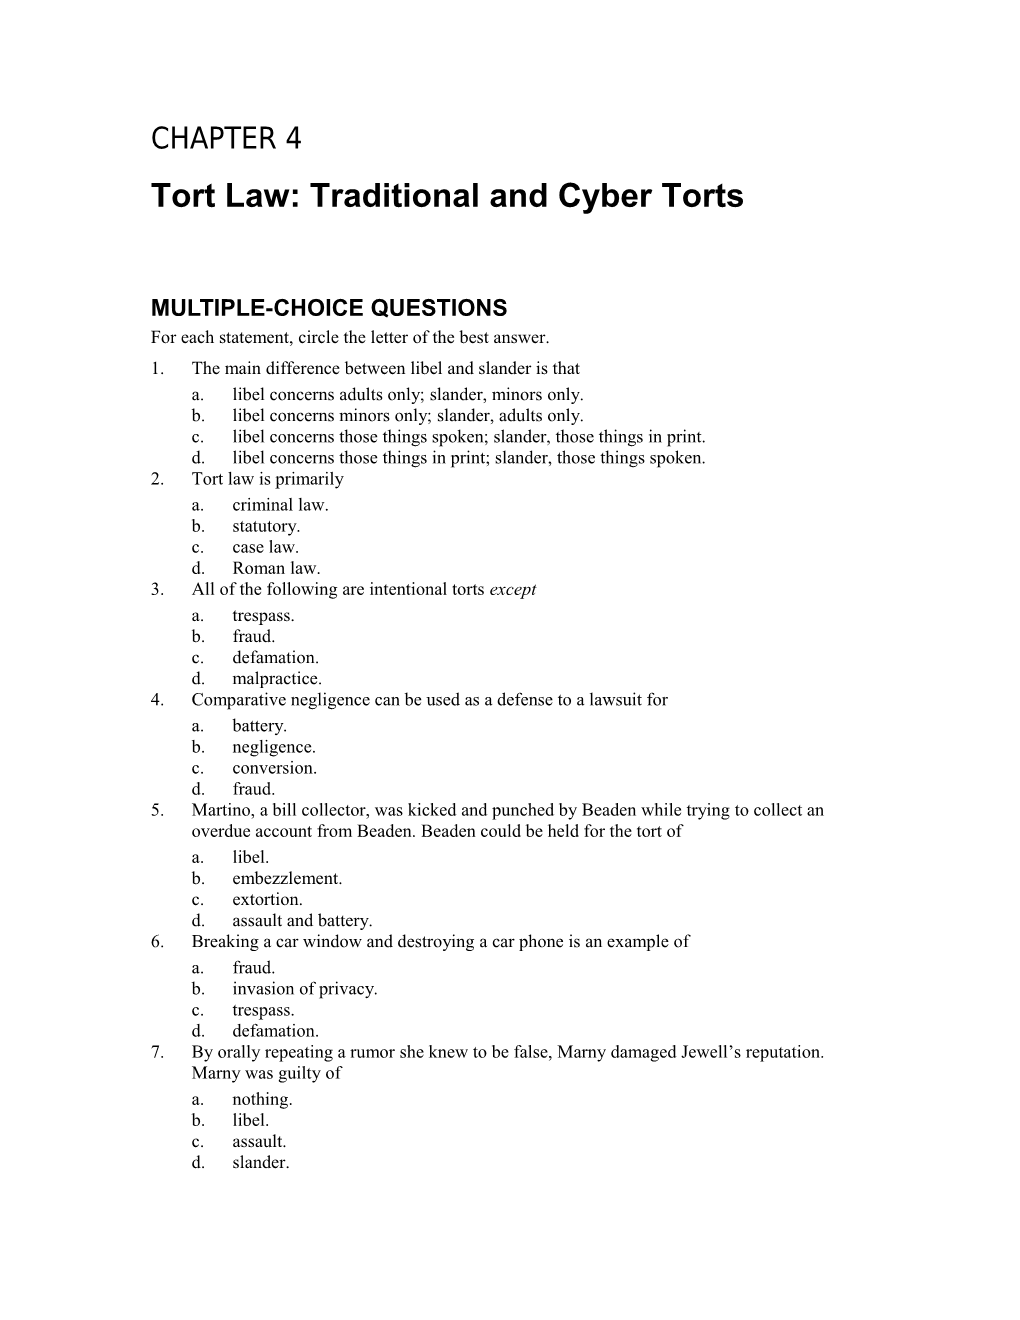 Tort Law: Traditional and Cyber Torts